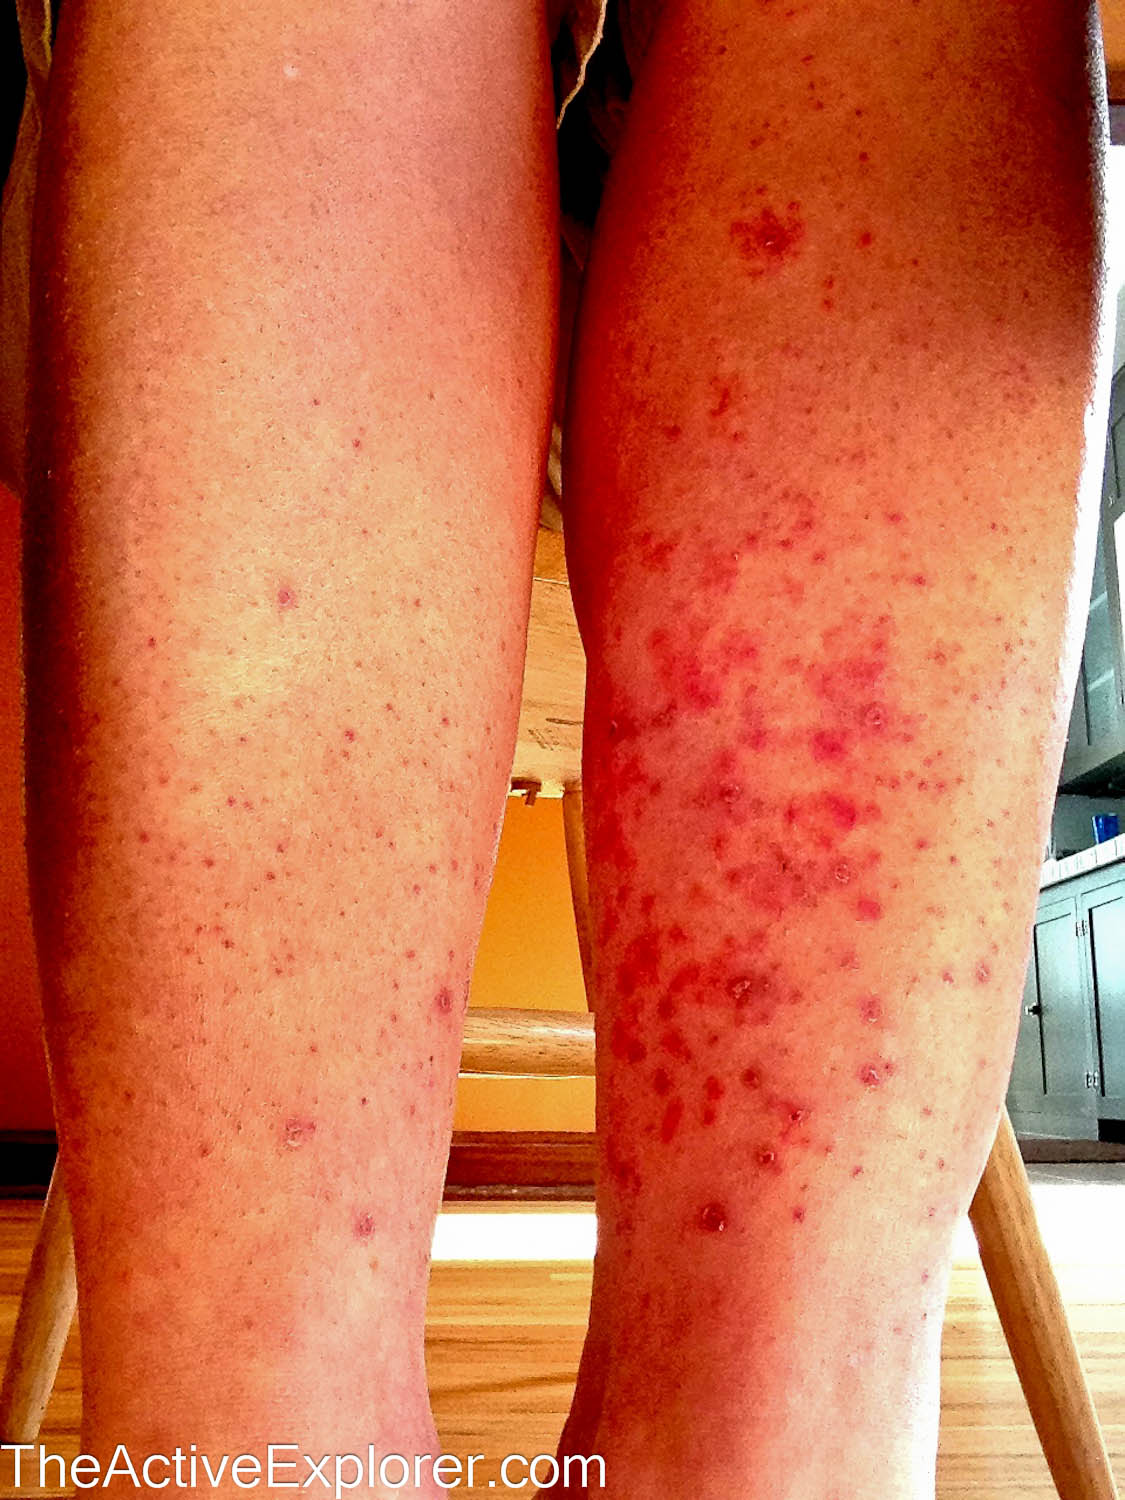 My legs today, 18 days following the tick bites